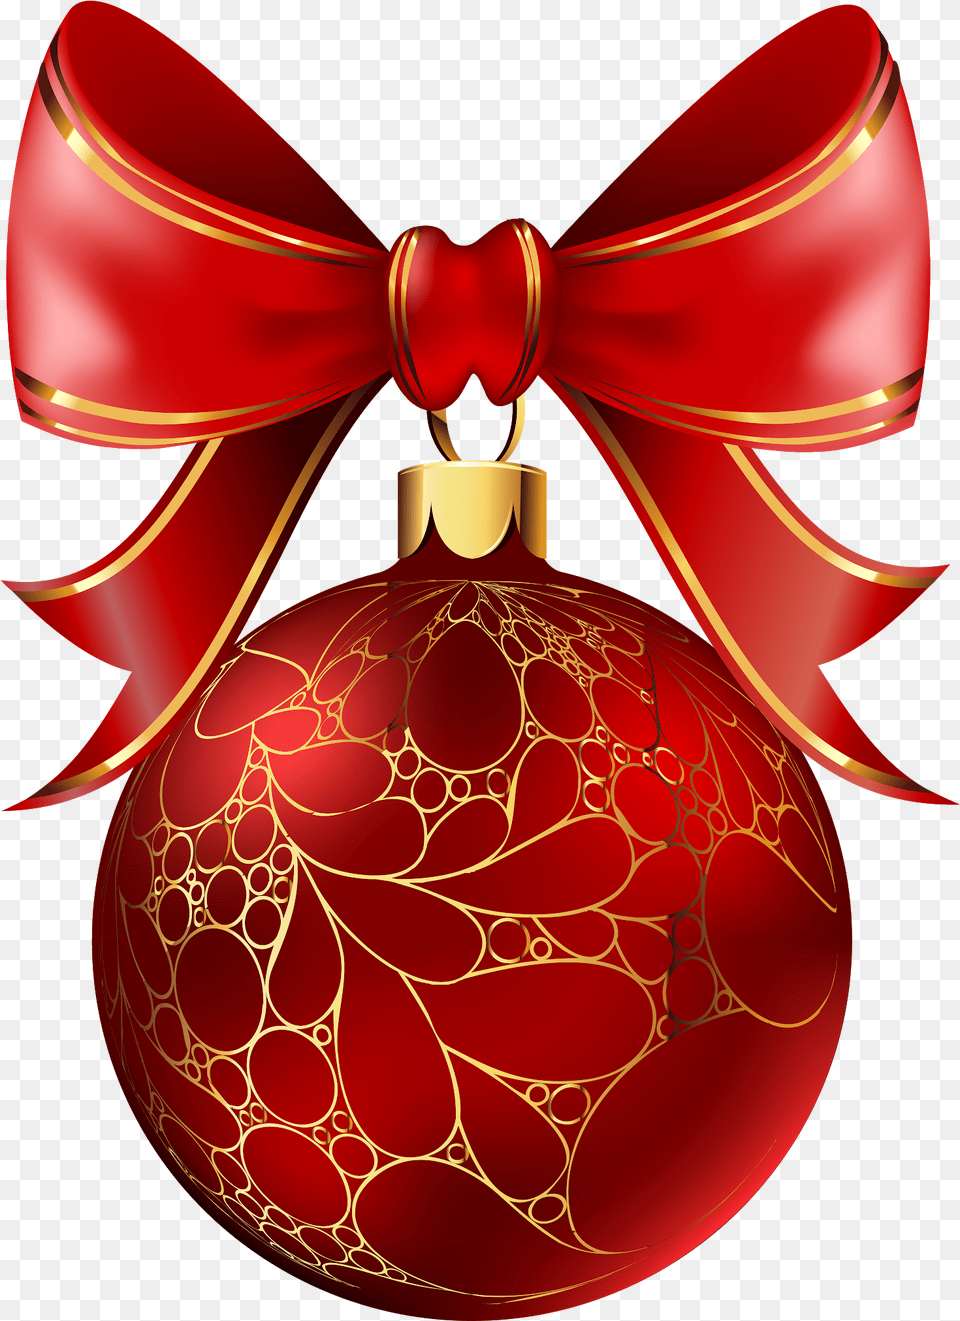 Christmas Hanging Ball Christmas Image U0026 Clipart Christmas Bauble With Bow, Accessories, Ornament, Food, Ketchup Png